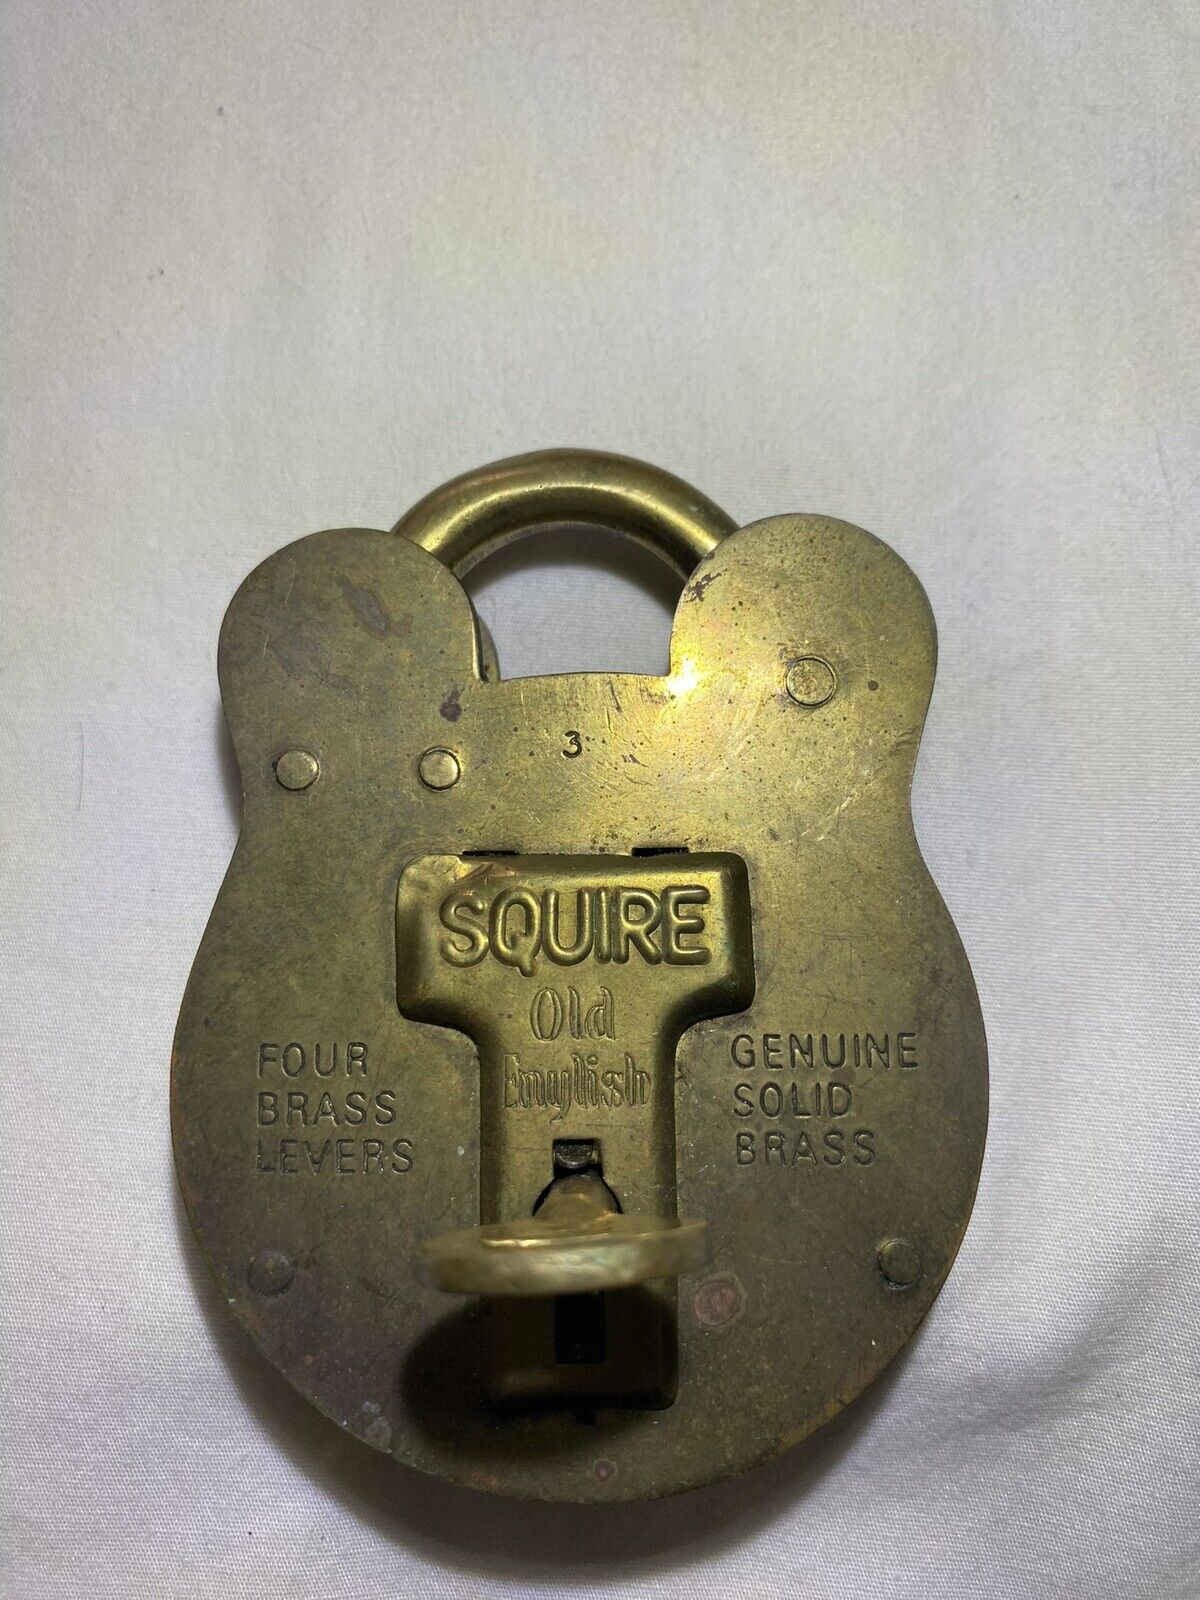 VINTAGE SQUIRE OLD ENGLISH ADMIRALTY SOLID BRASS PADLOCK W/KEY JAS MORGAN & SONS